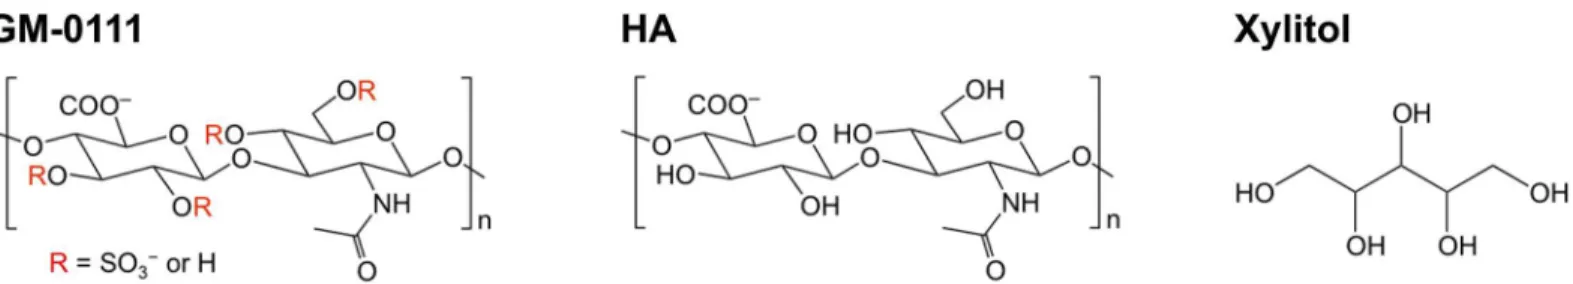 Fig 1. Chemical structures of GM-0111 (A), HA (B), and xylitol (C). GM-0111 shares the same disaccharide backbone with that of HA.